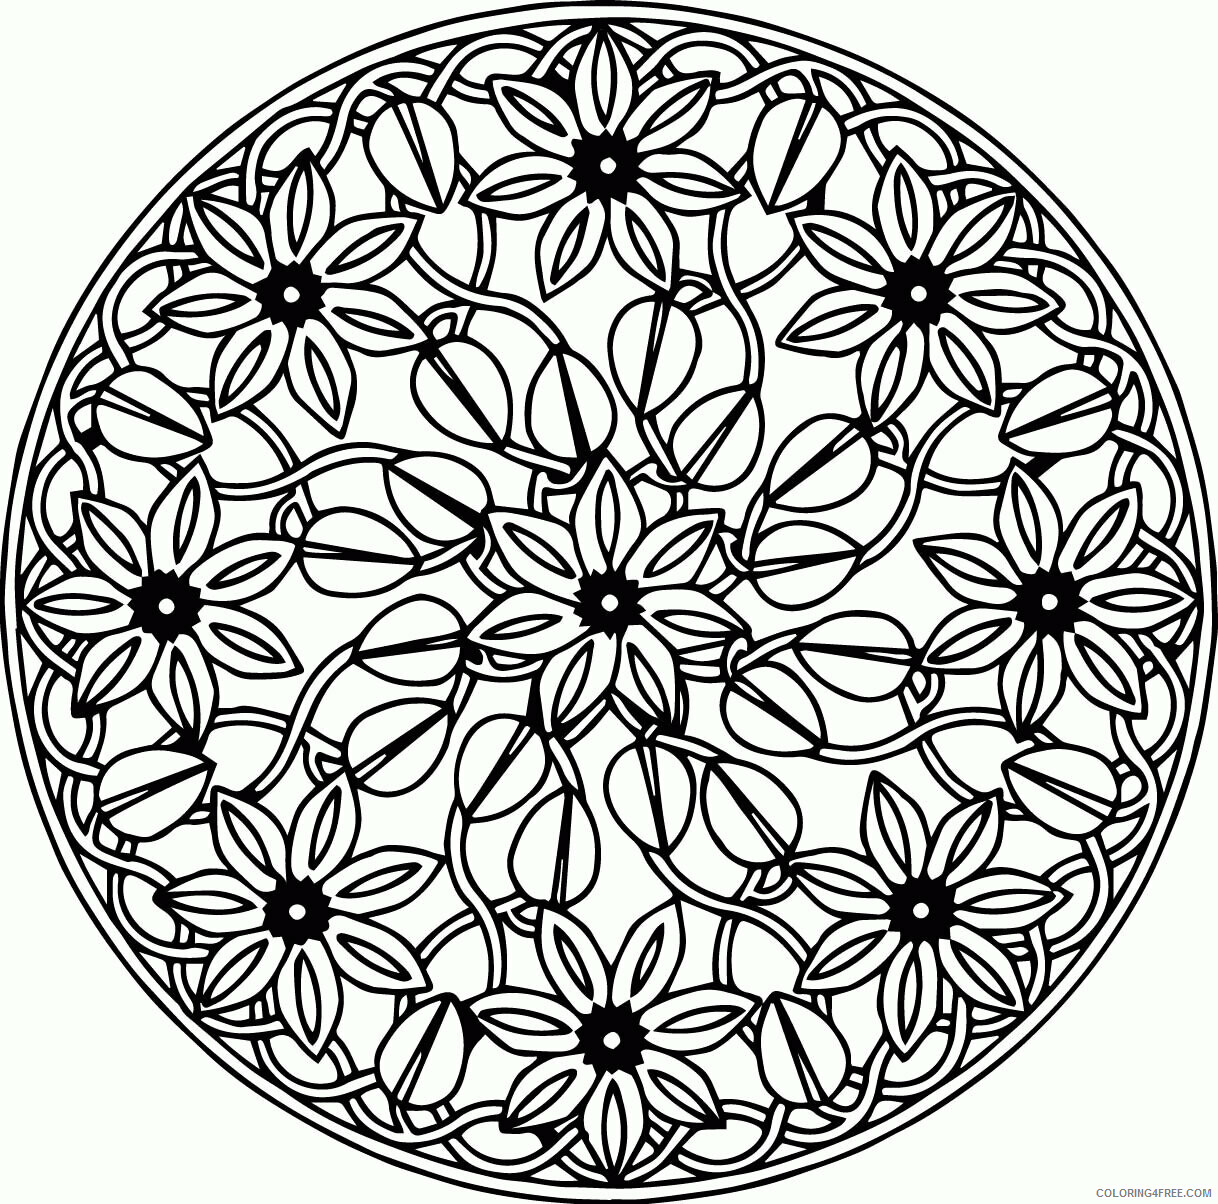 Advanced Coloring Pages Free Printable Sheets Free Printable Advanced Pages 2021 a 2379 Coloring4free